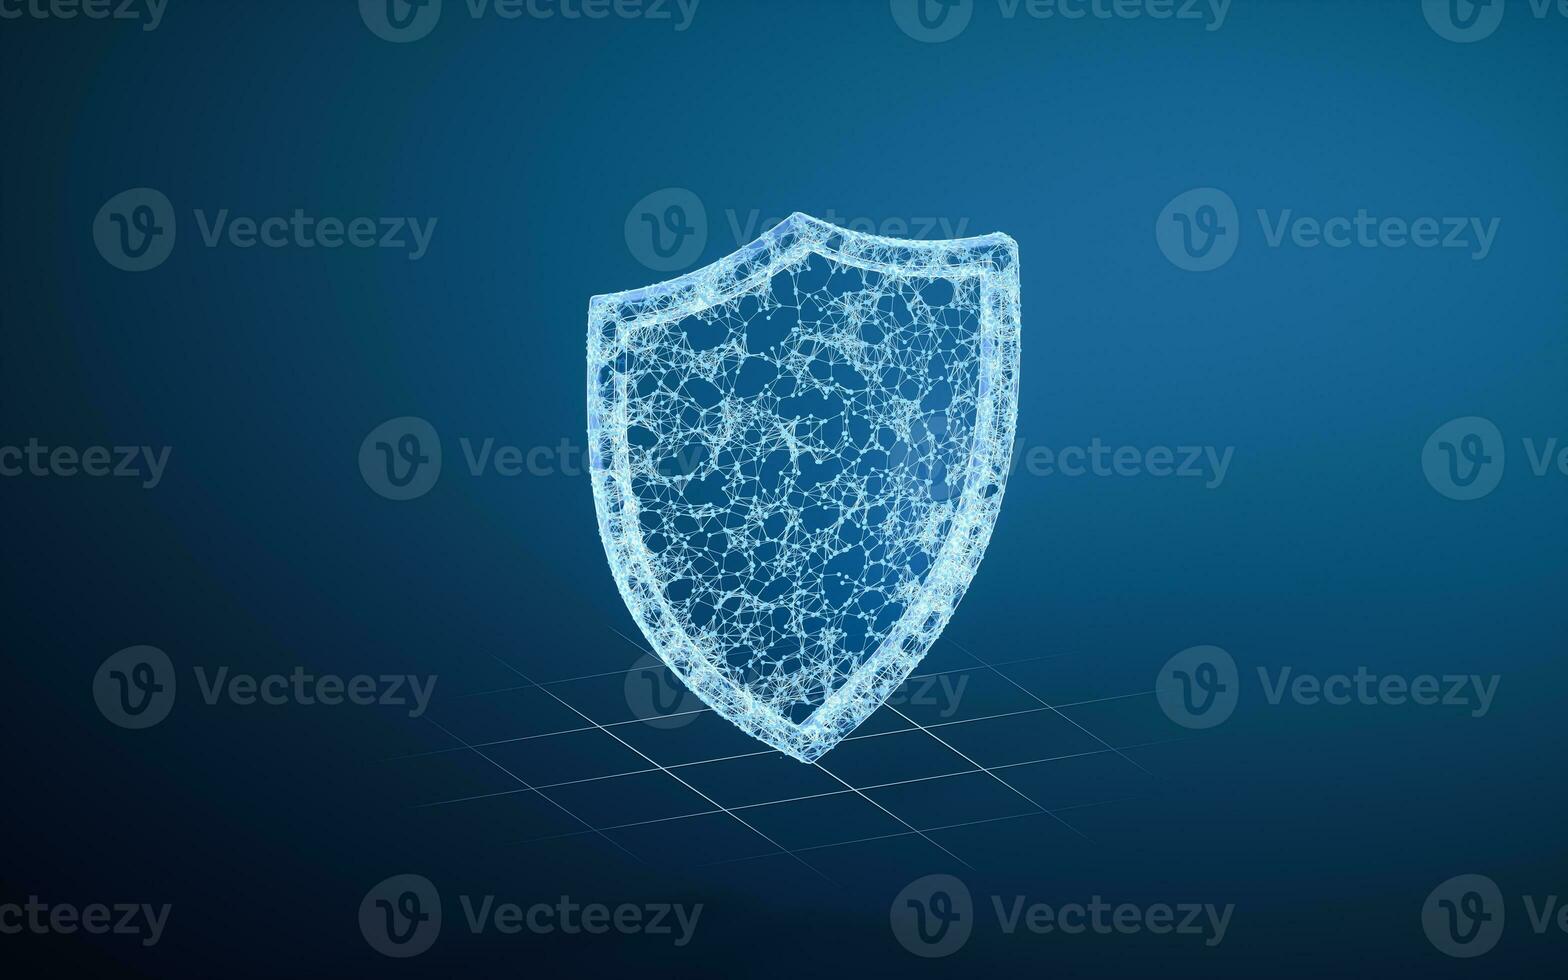 Shield and glowing lines with blue background, 3d rendering. photo